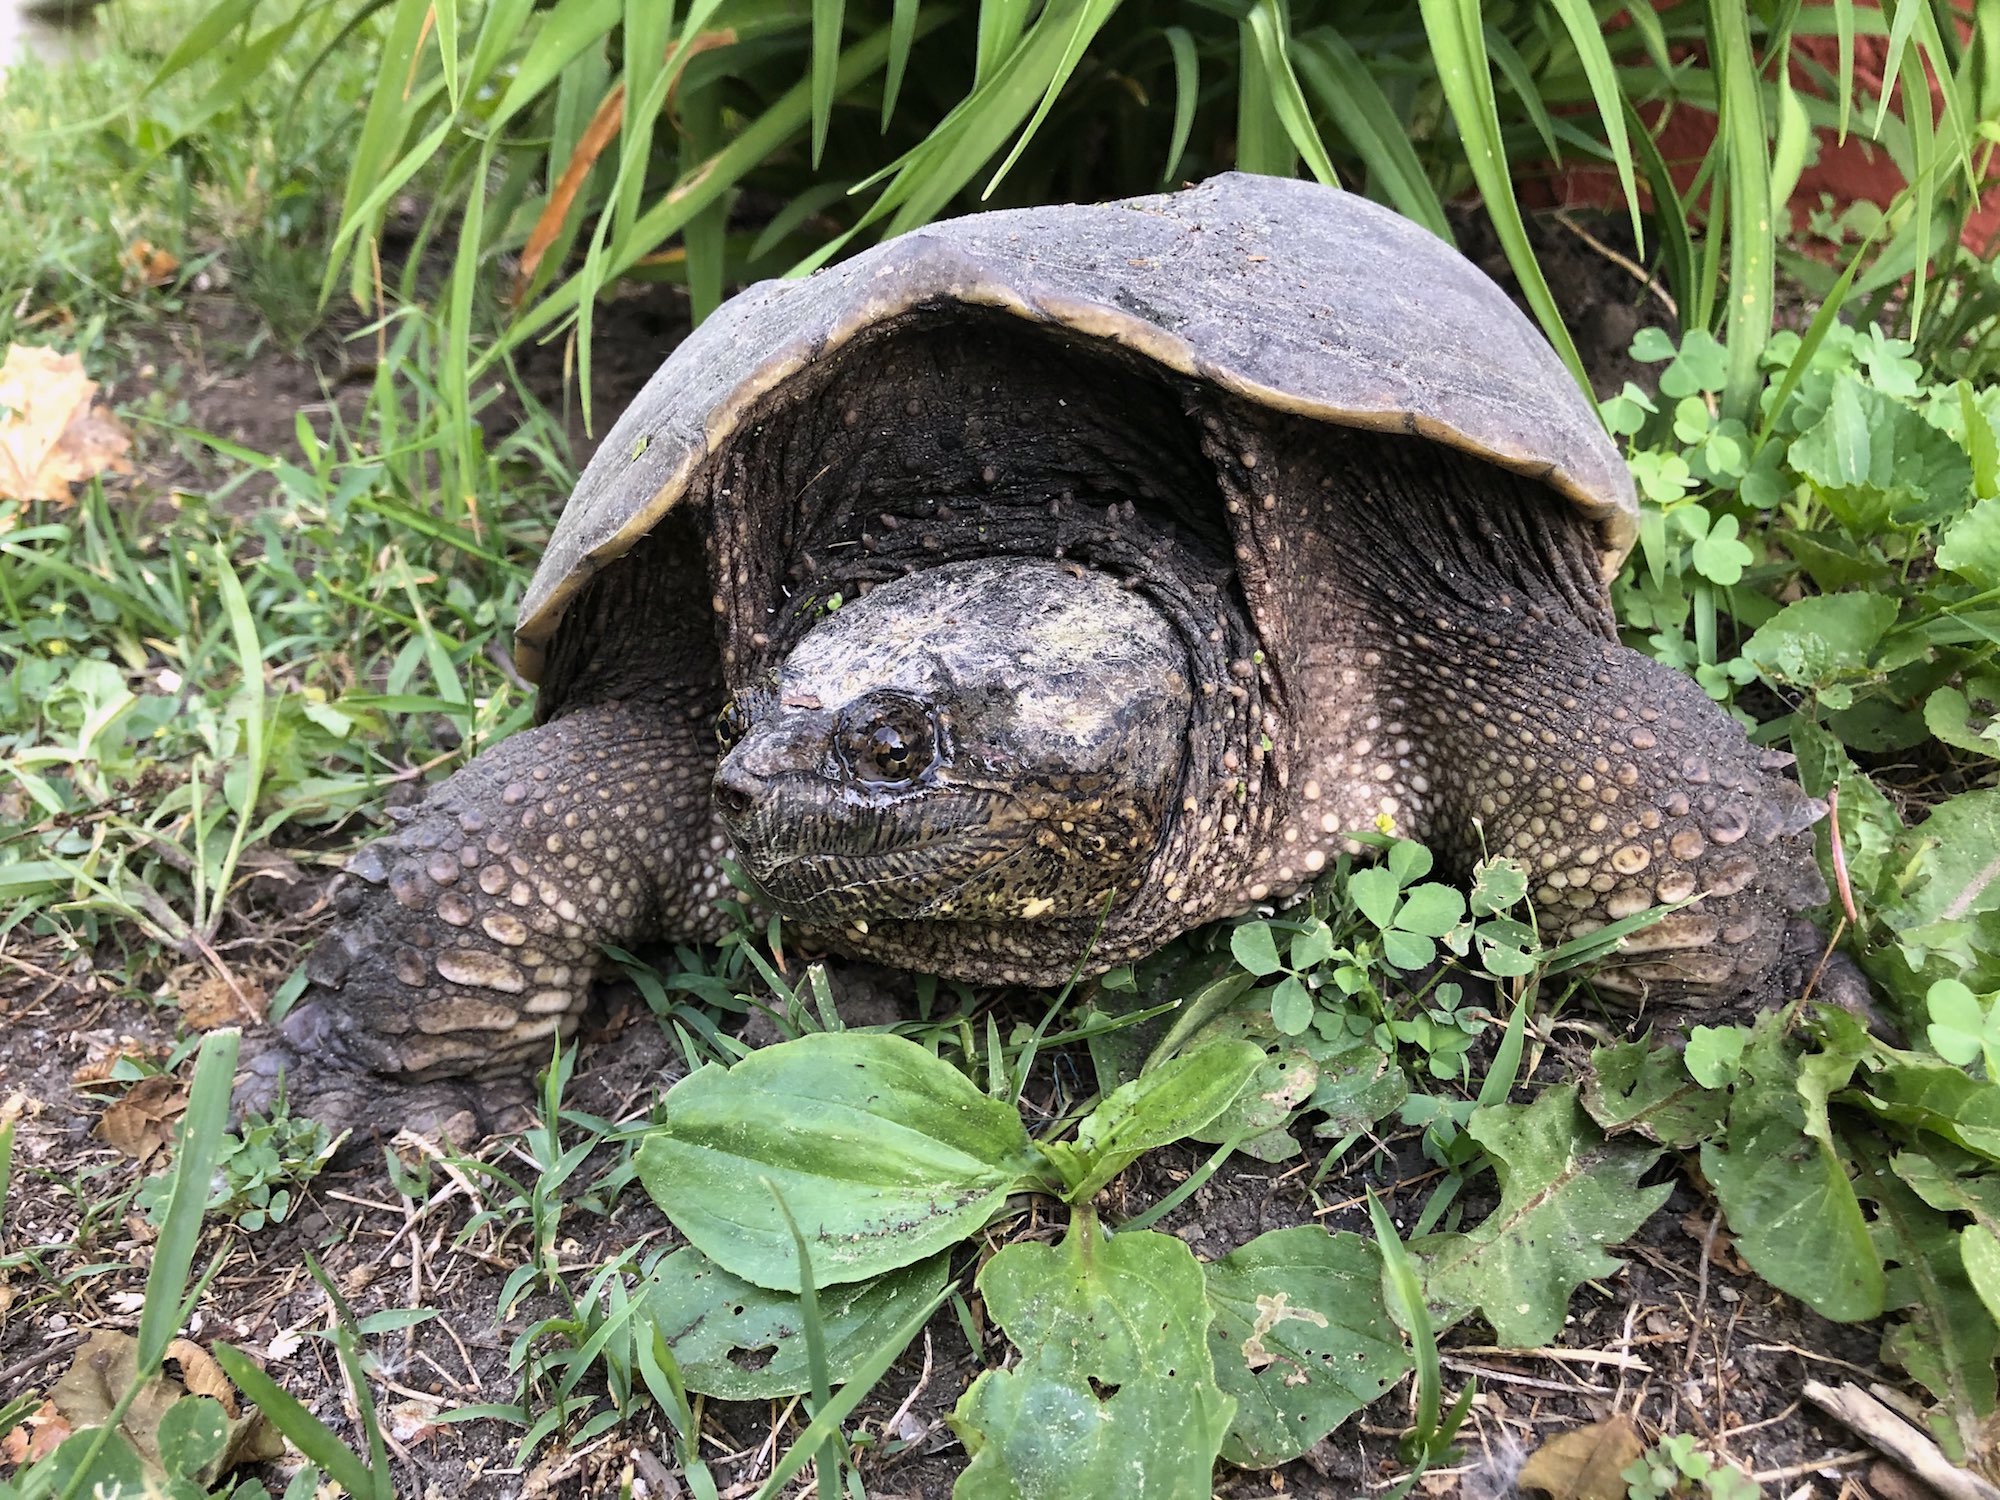 Snapping Turtle laying eggs in flower bed along Arbor Drive in Madison, Wisconsin on June 8, 2020.